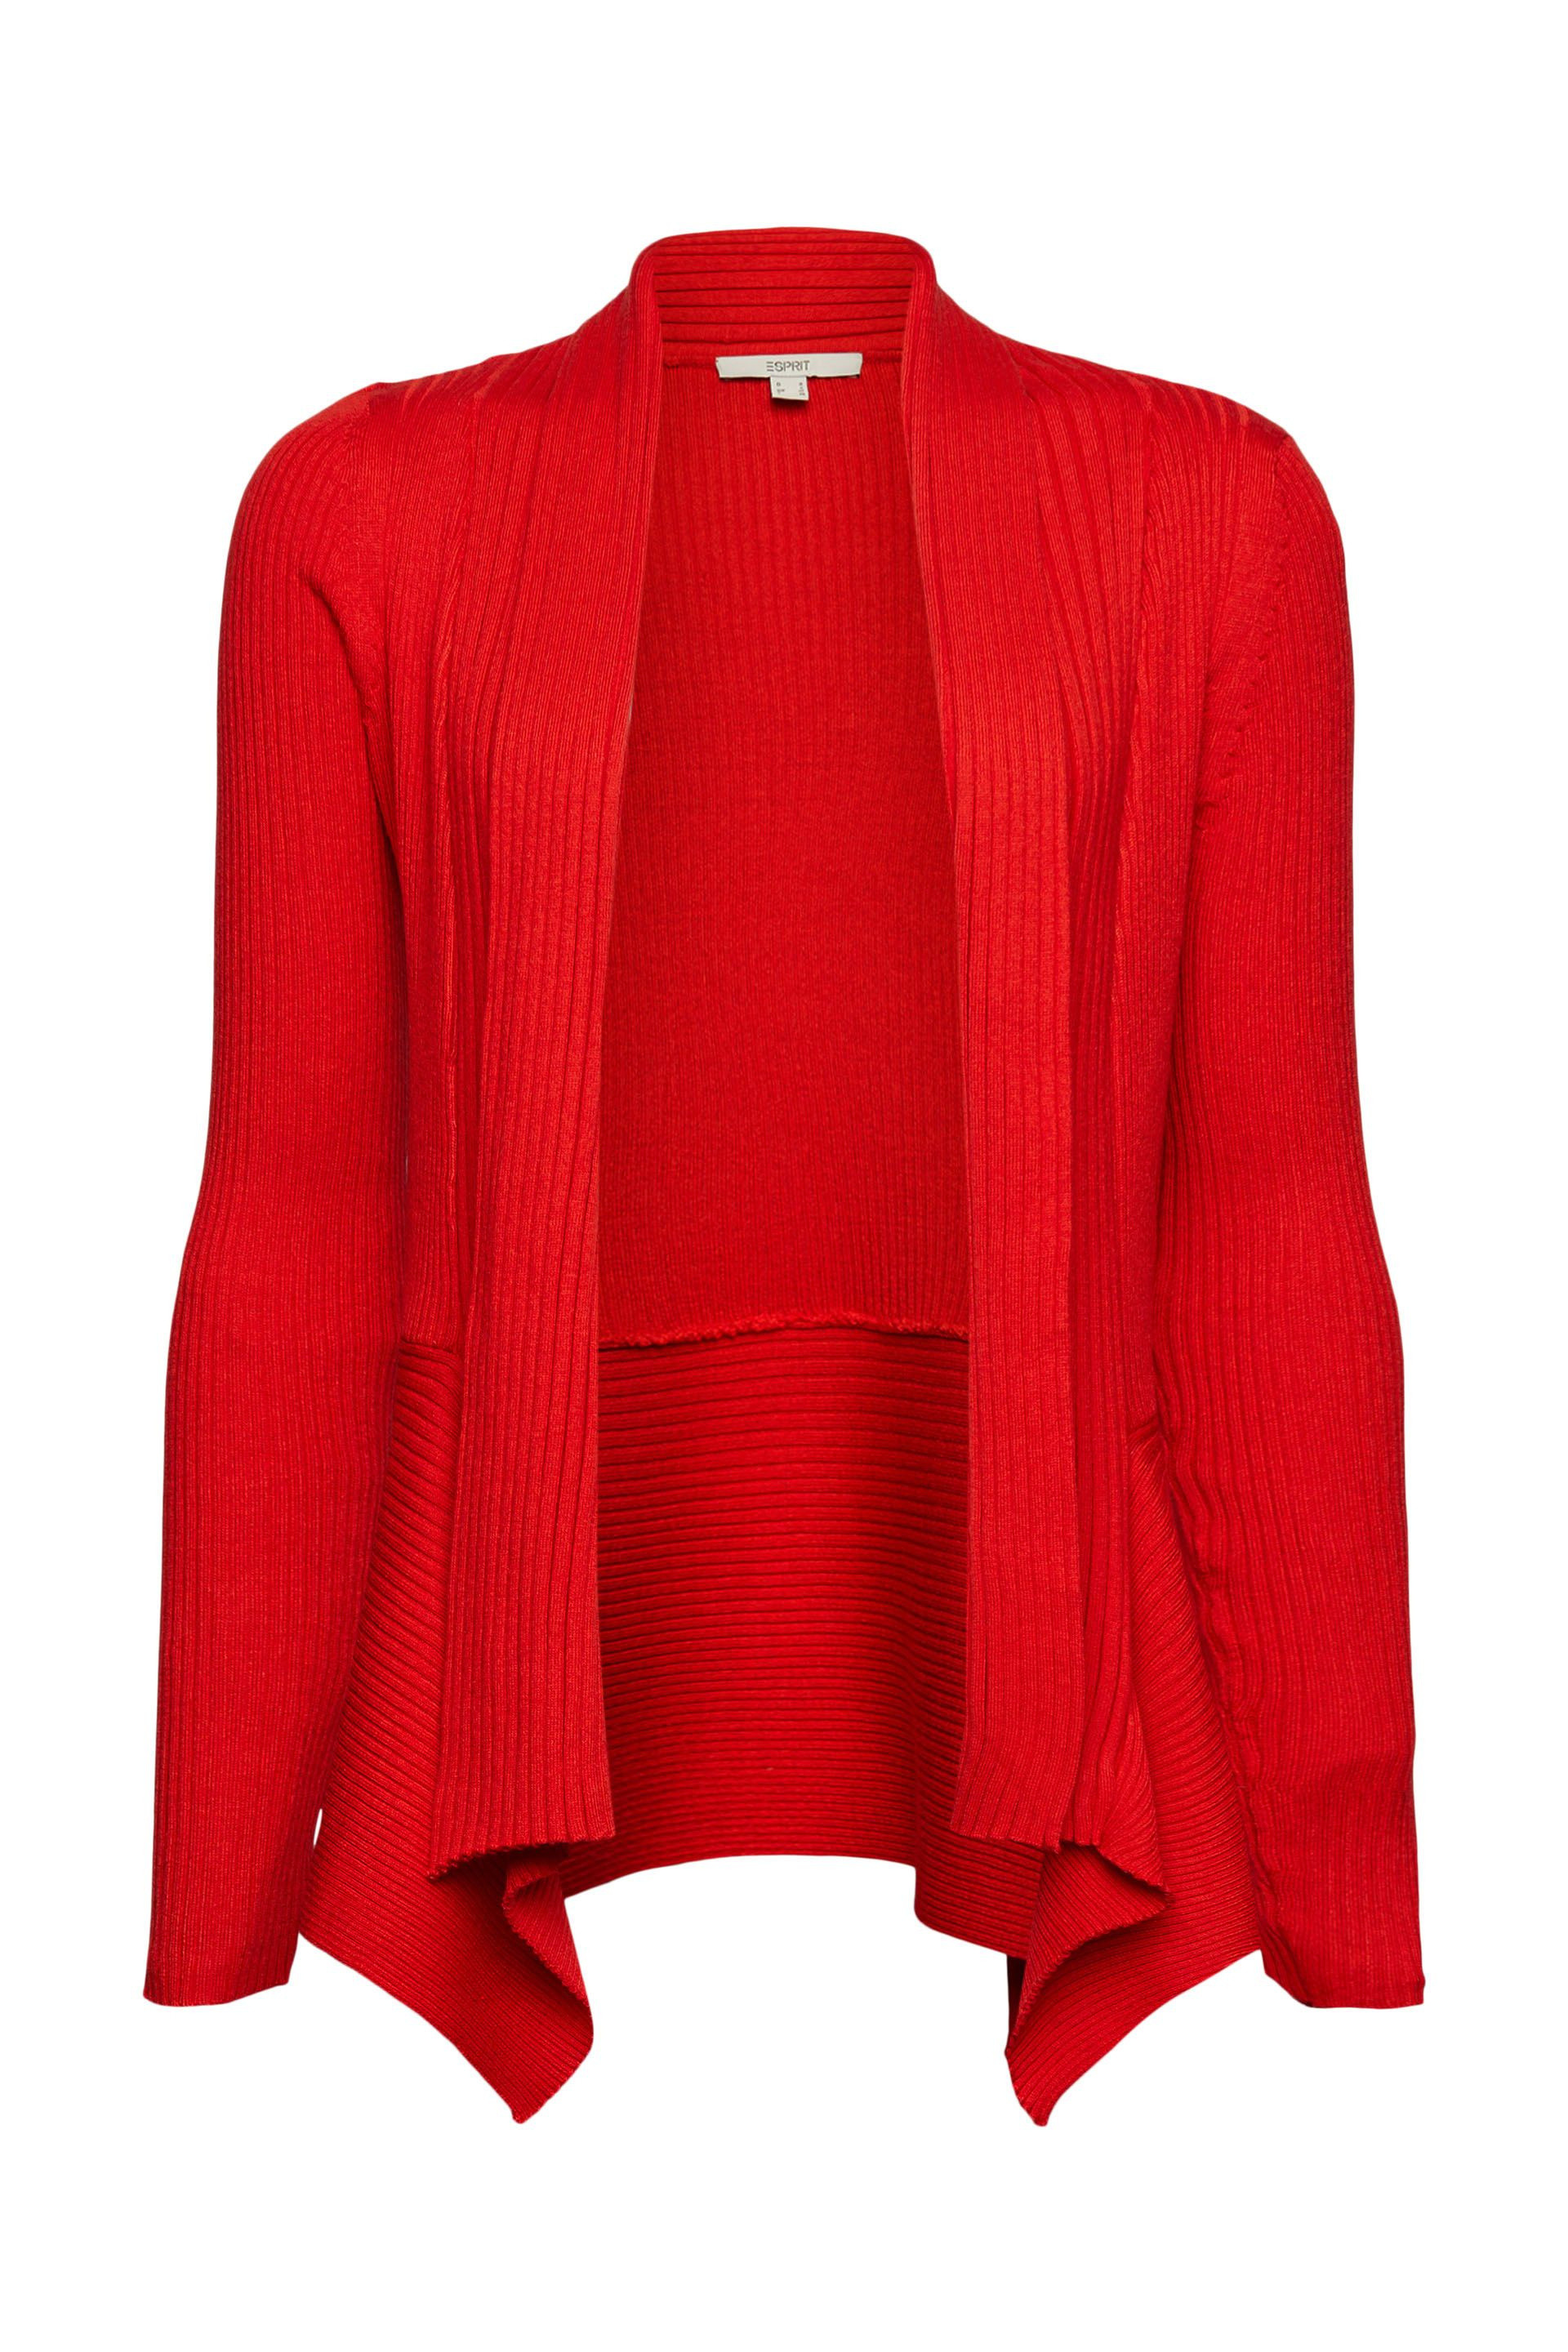 Cardigan aperto a coste, Rosso, large